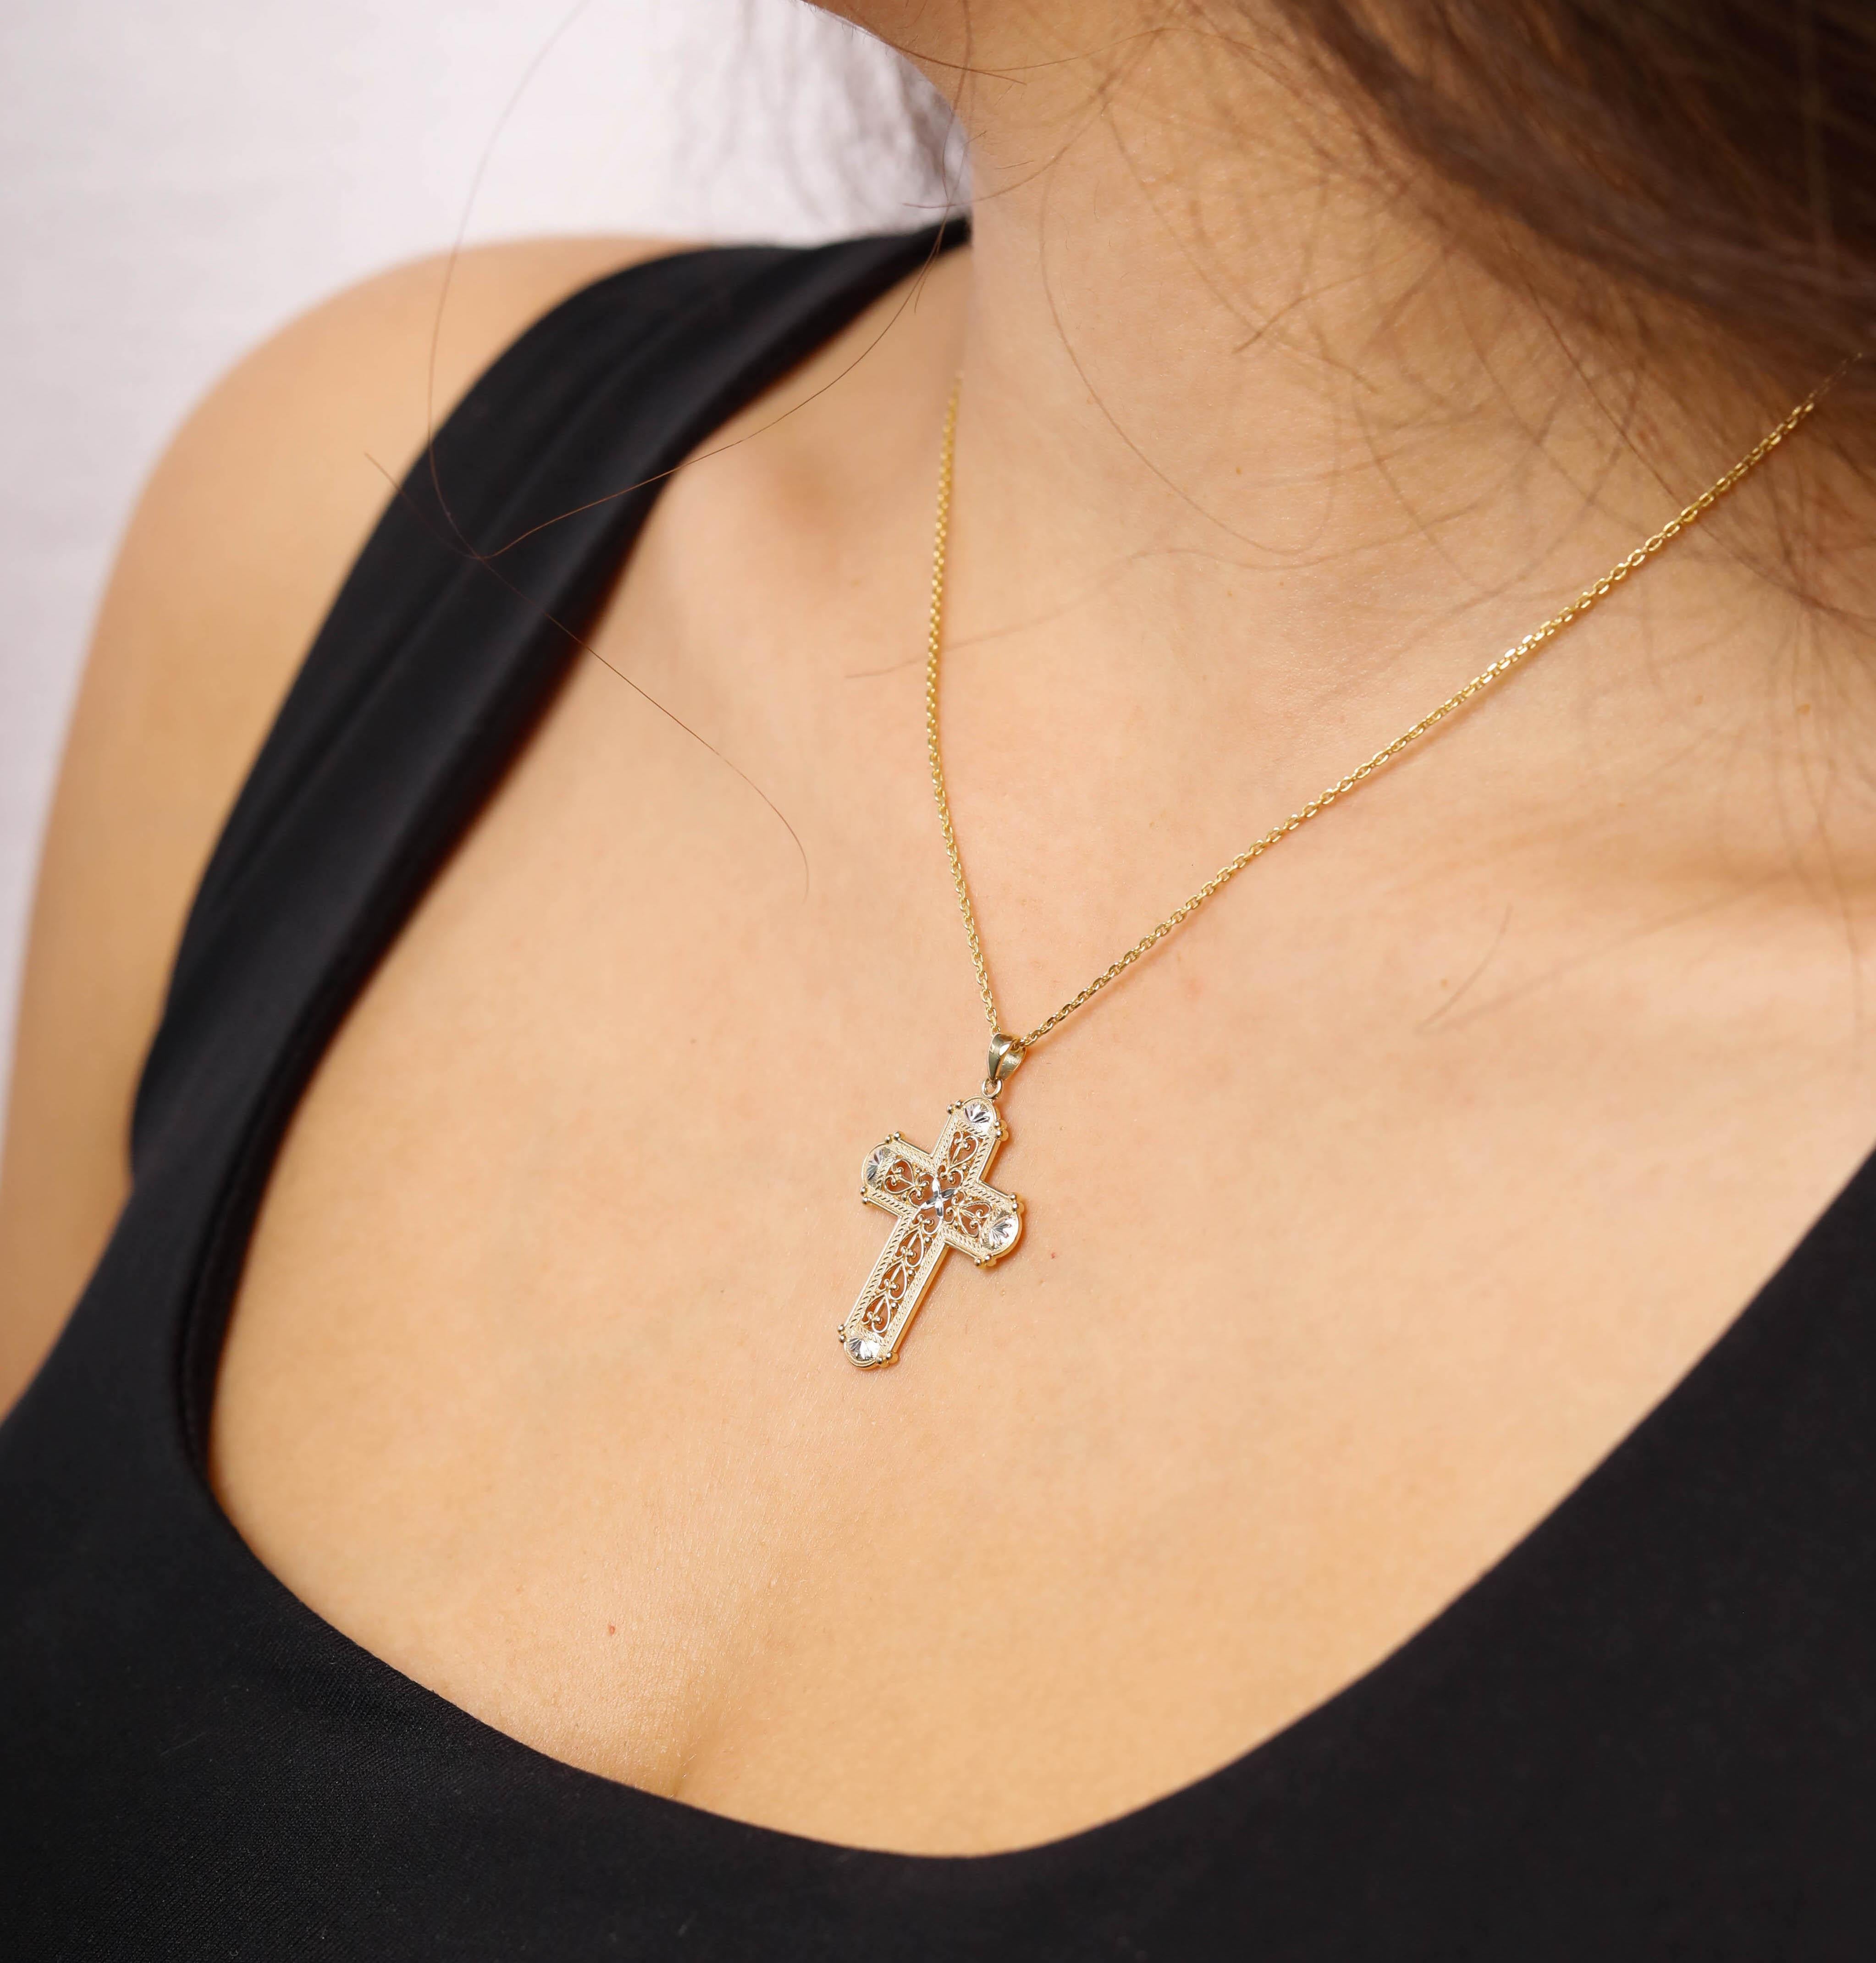 2.2 Grams 14 Karat Yellow Gold Intricate Cross Solid Gold Pendant

These delicate cross pendants are crafted in solid 14 karats yellow gold. Modeled after traditional jewelry, these pendants are with cross Design take on the classic gold